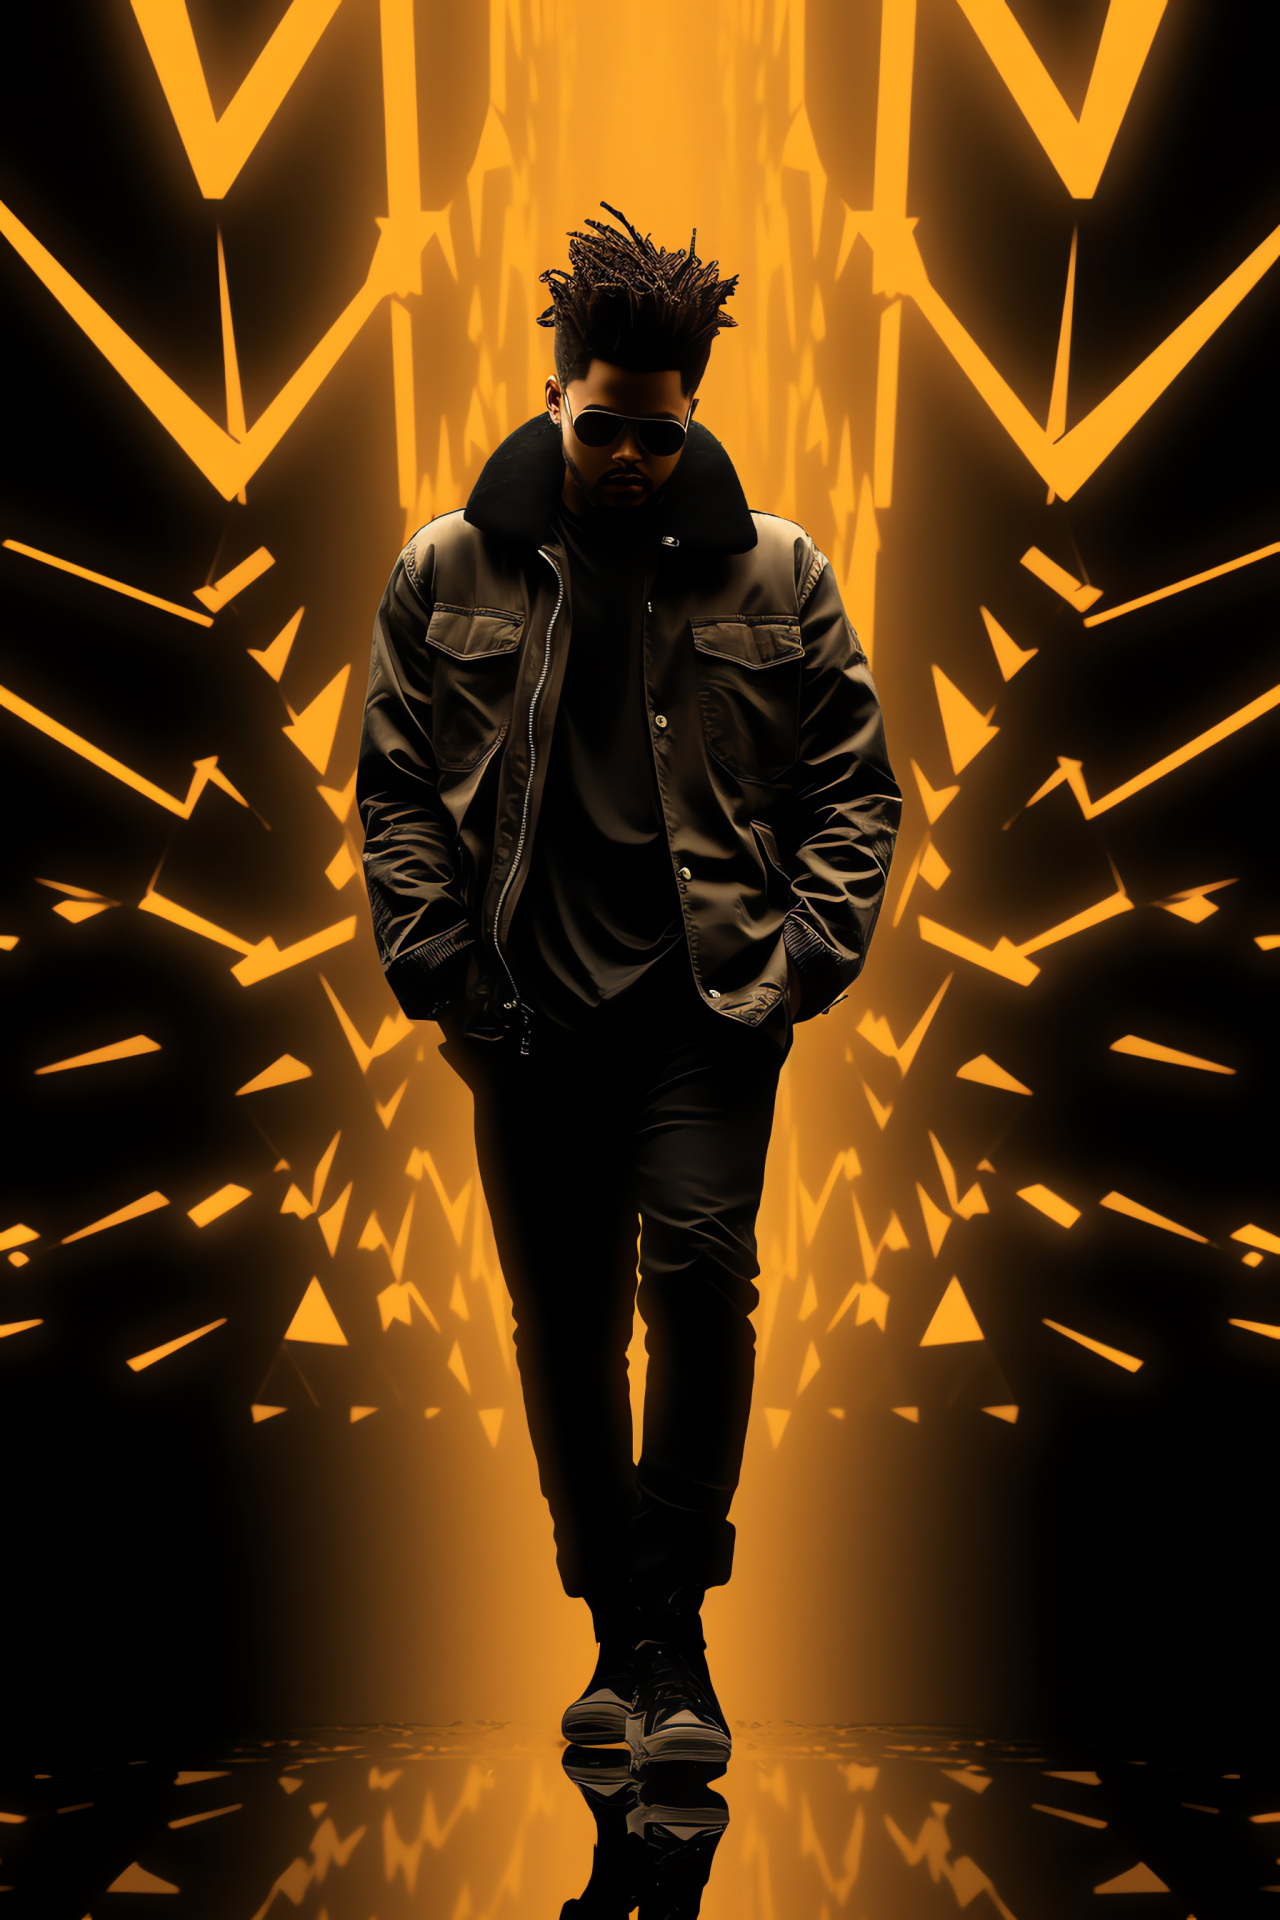 The Weeknd, prominent entertainer, intense stare, artist's haircut, chic wardrobe, HD Phone Image